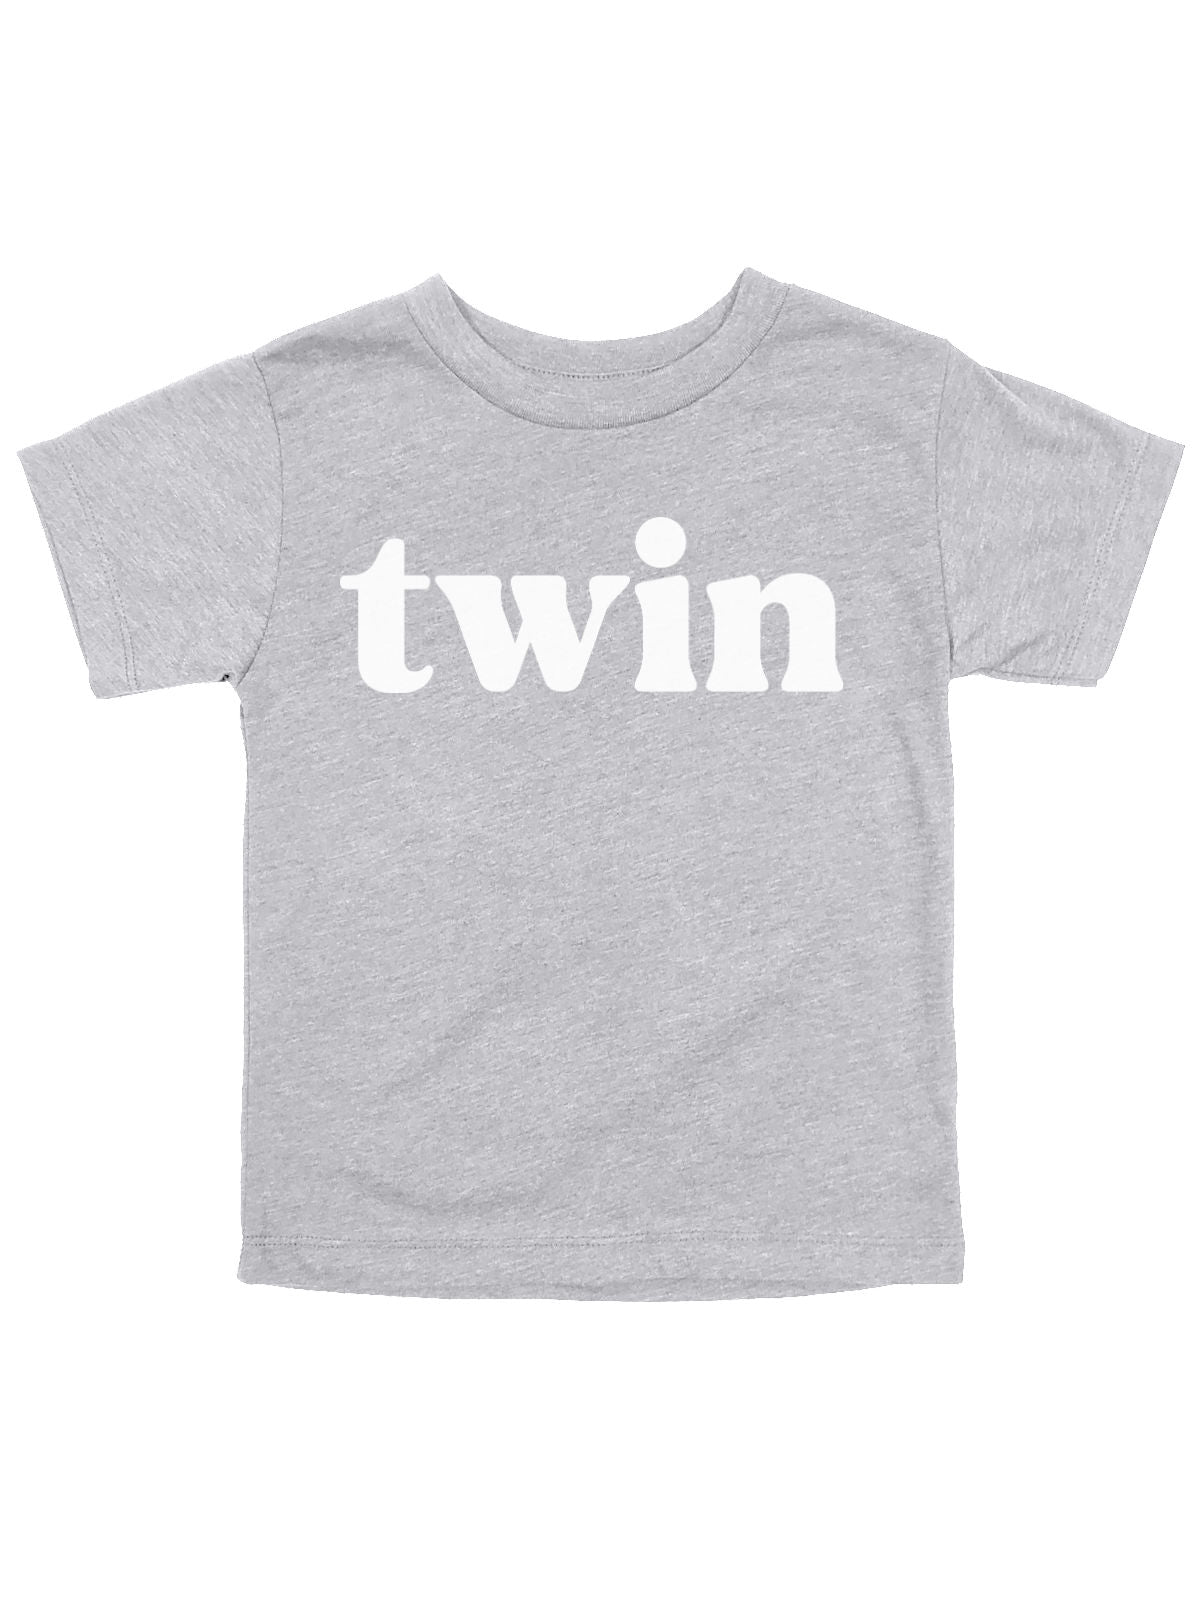 Twins Matching Shirt in Heather Gray